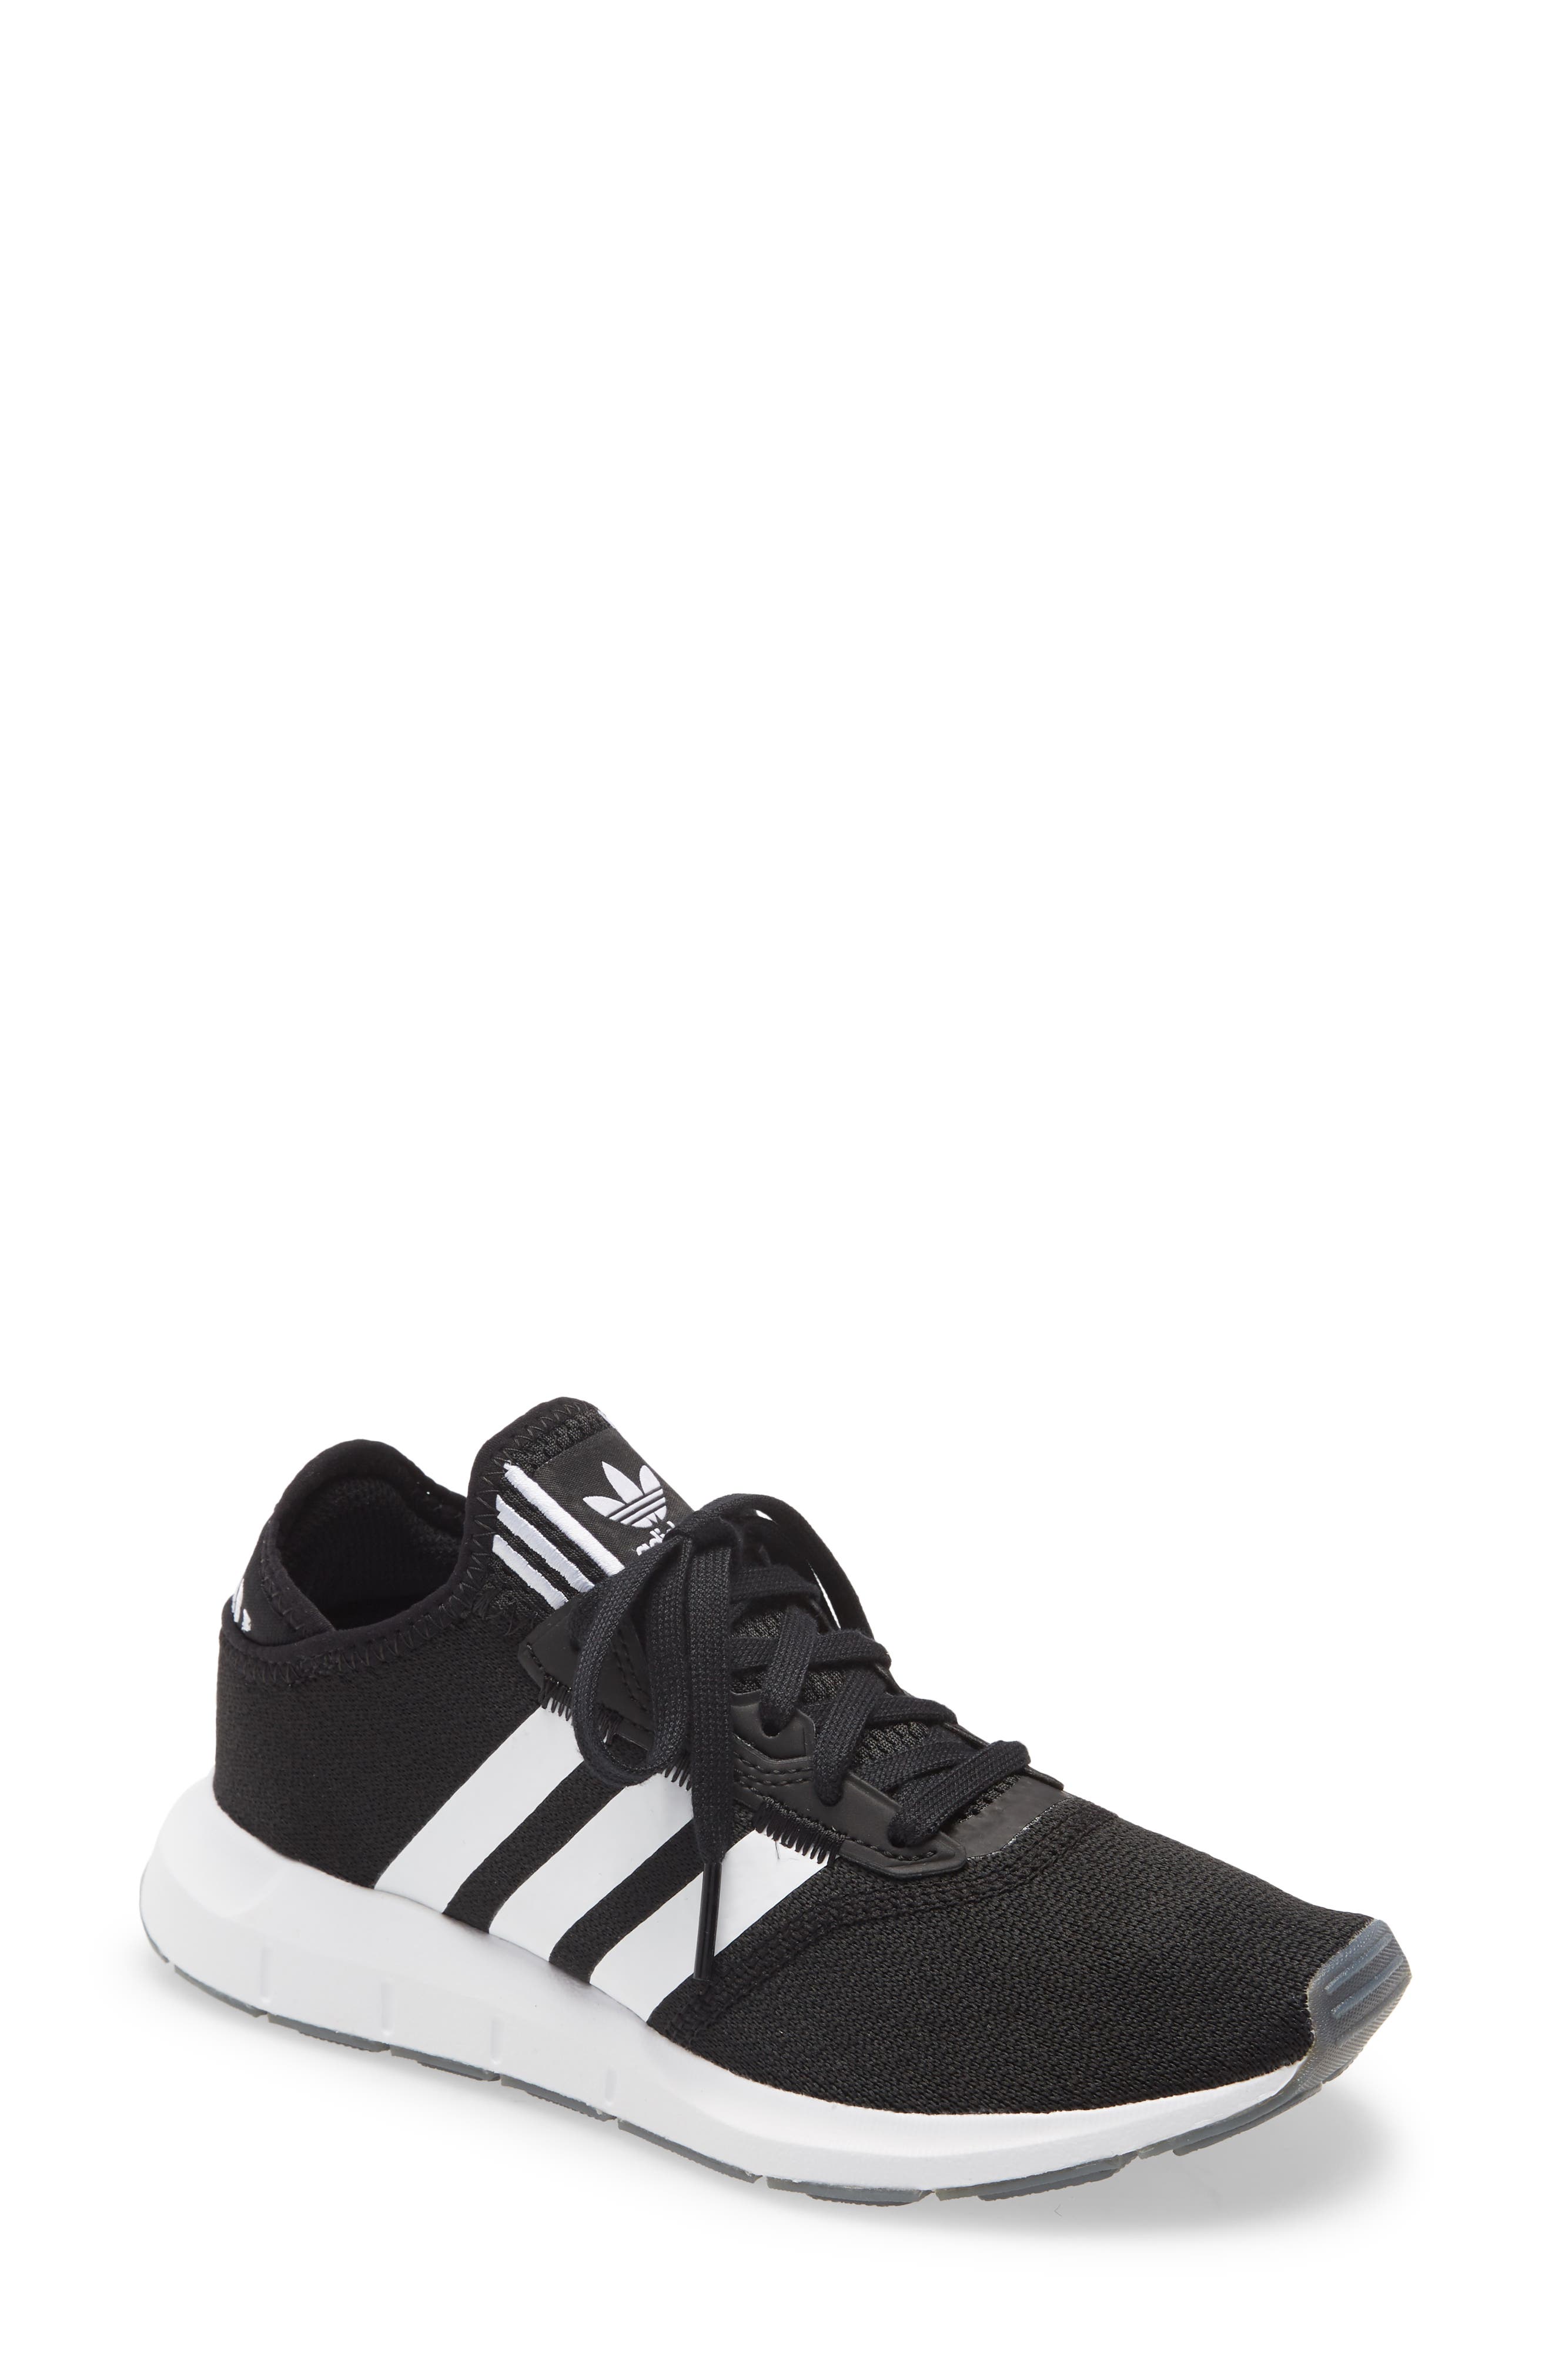 UPC 191983699463 product image for adidas Swift Run X Sneaker in Core Black/White/Silver at Nordstrom, Size 10 | upcitemdb.com